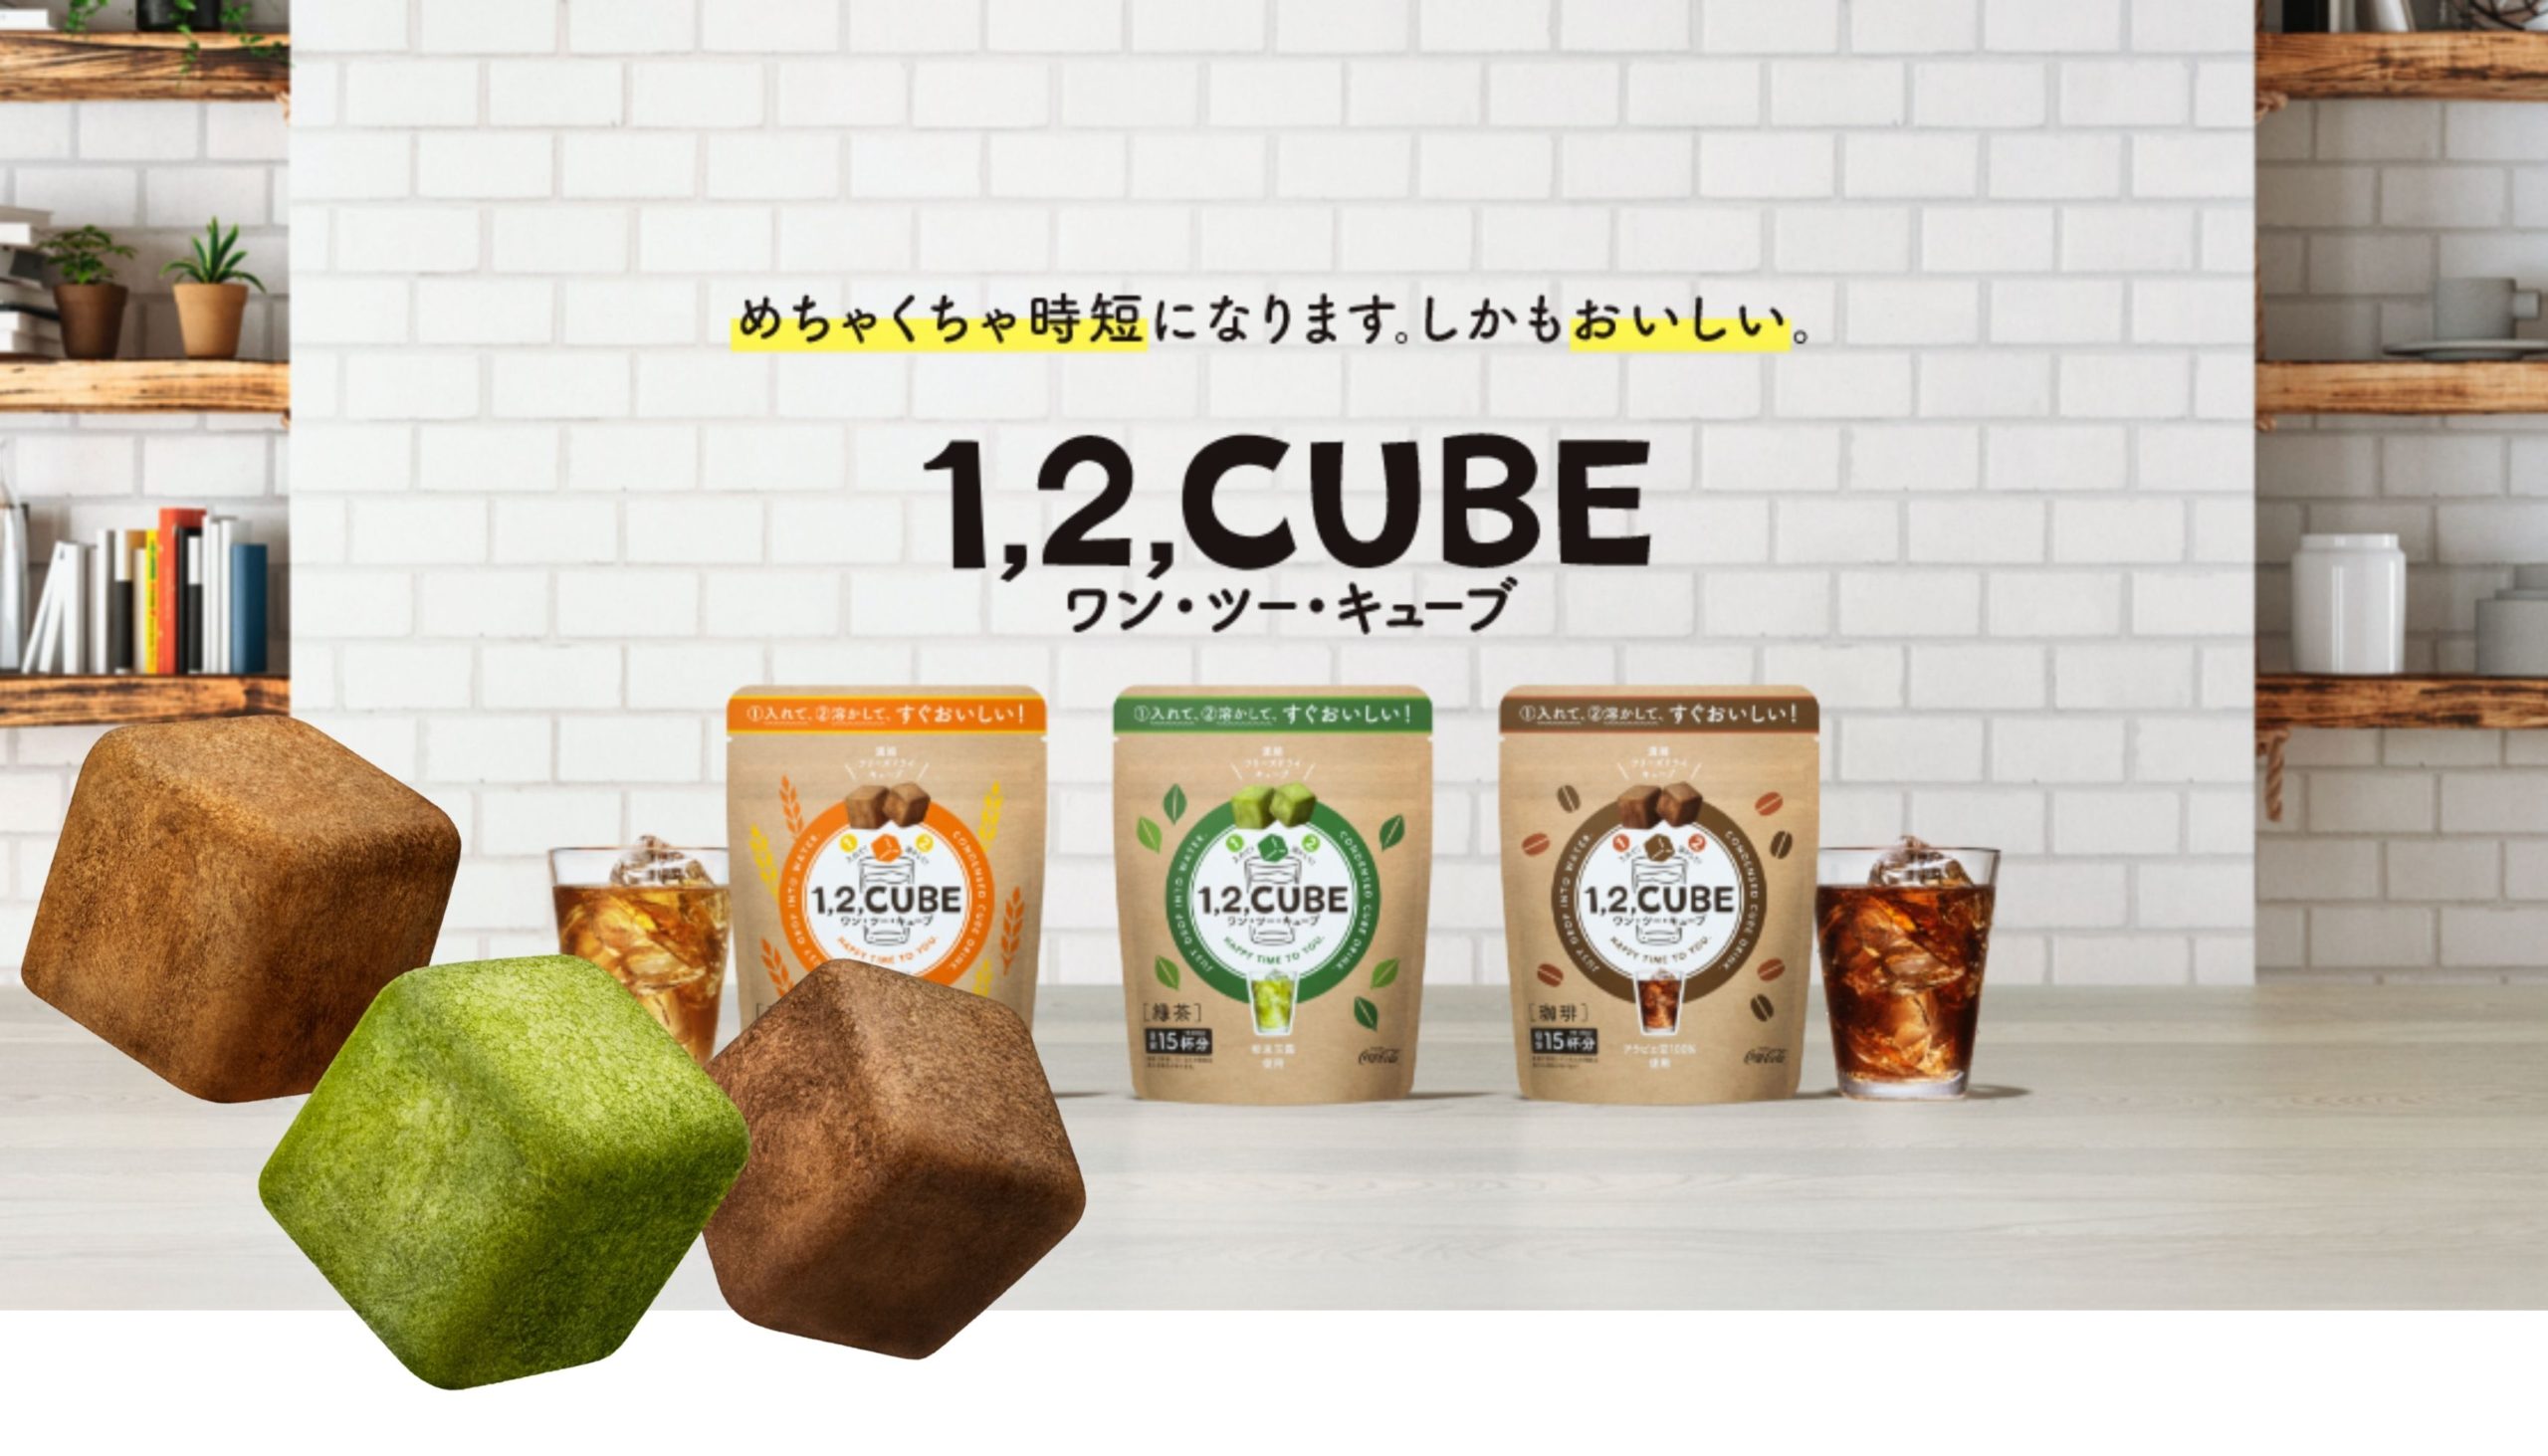 Only in Japan:  Coca-Cola release freeze dried tea and coffee cubes